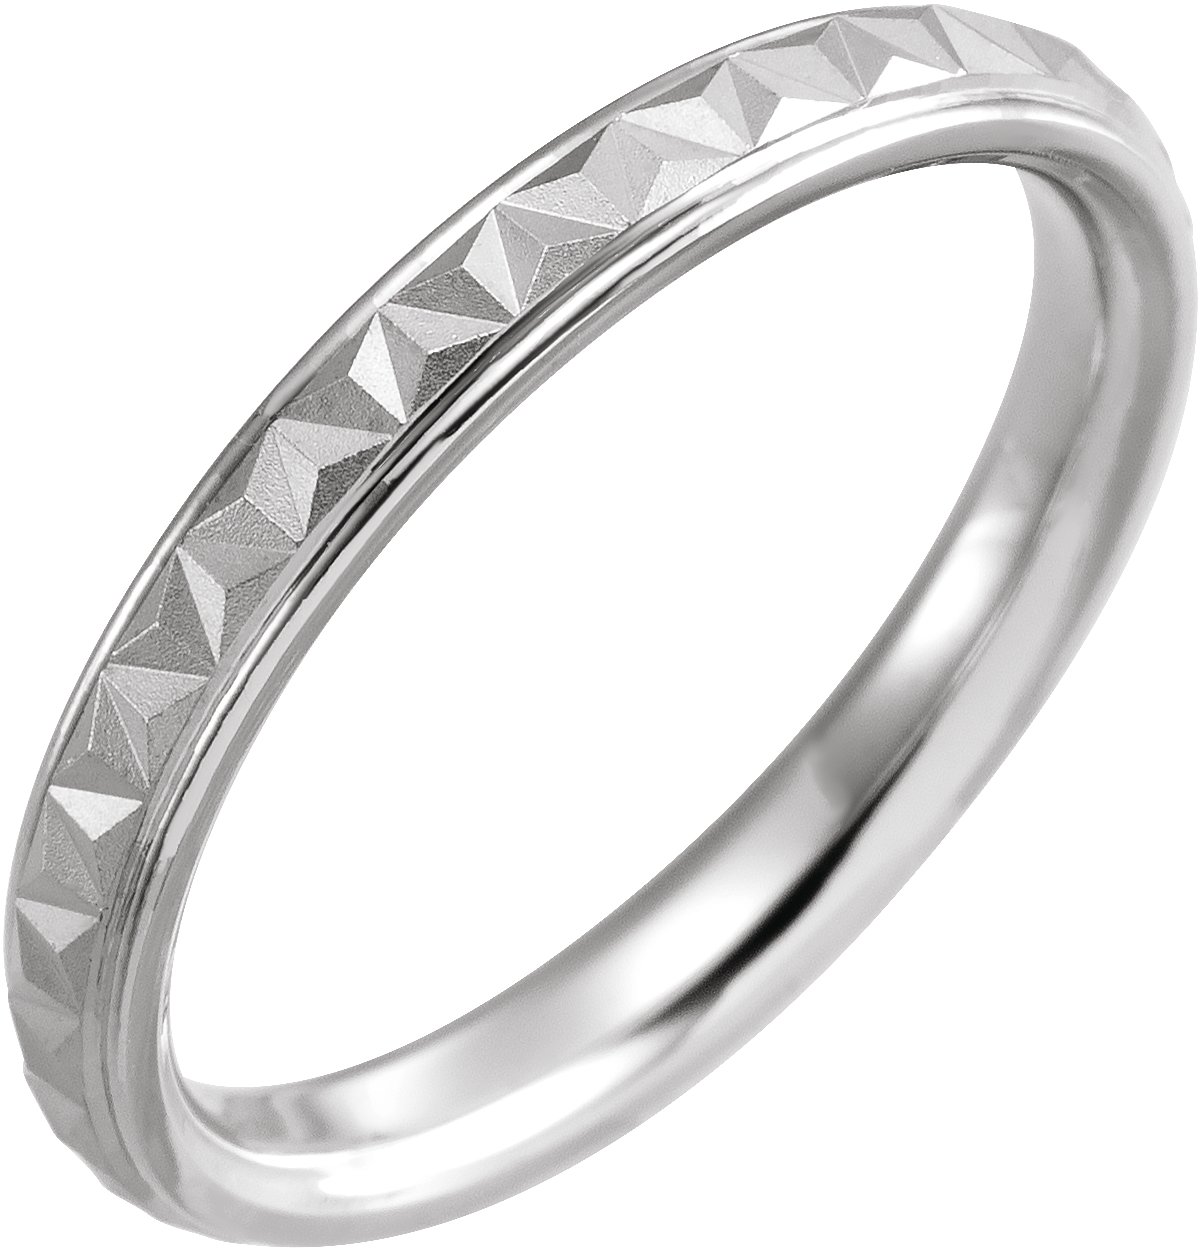 Continuum Sterling Silver 3 mm Geometric Band with Matte/Polished Finish Size 4.5